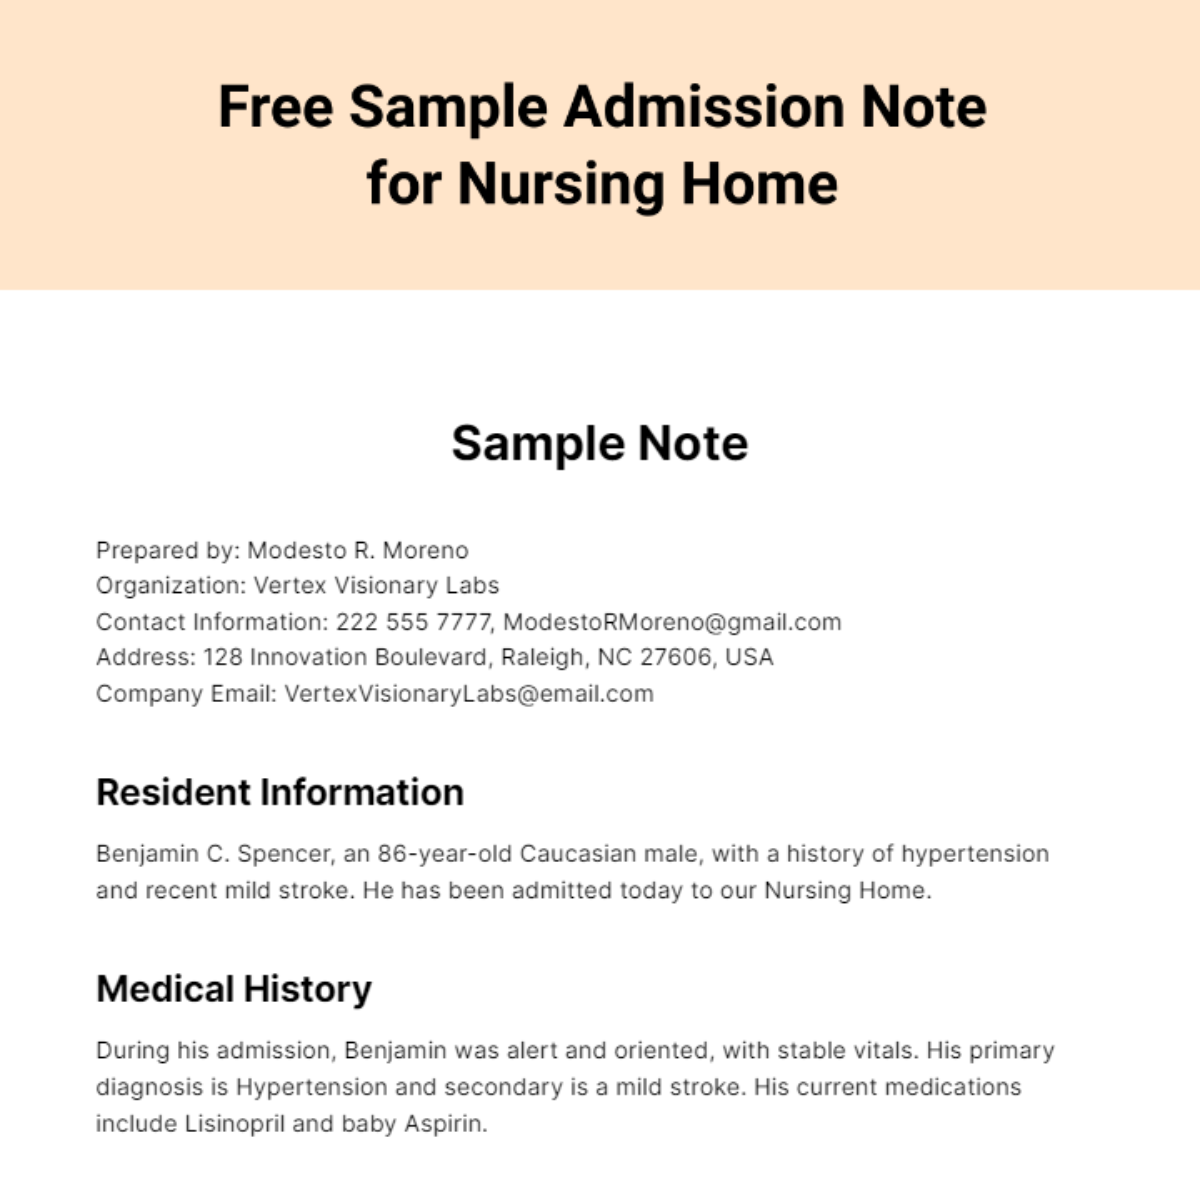 Sample Admission Note for Nursing Home Template